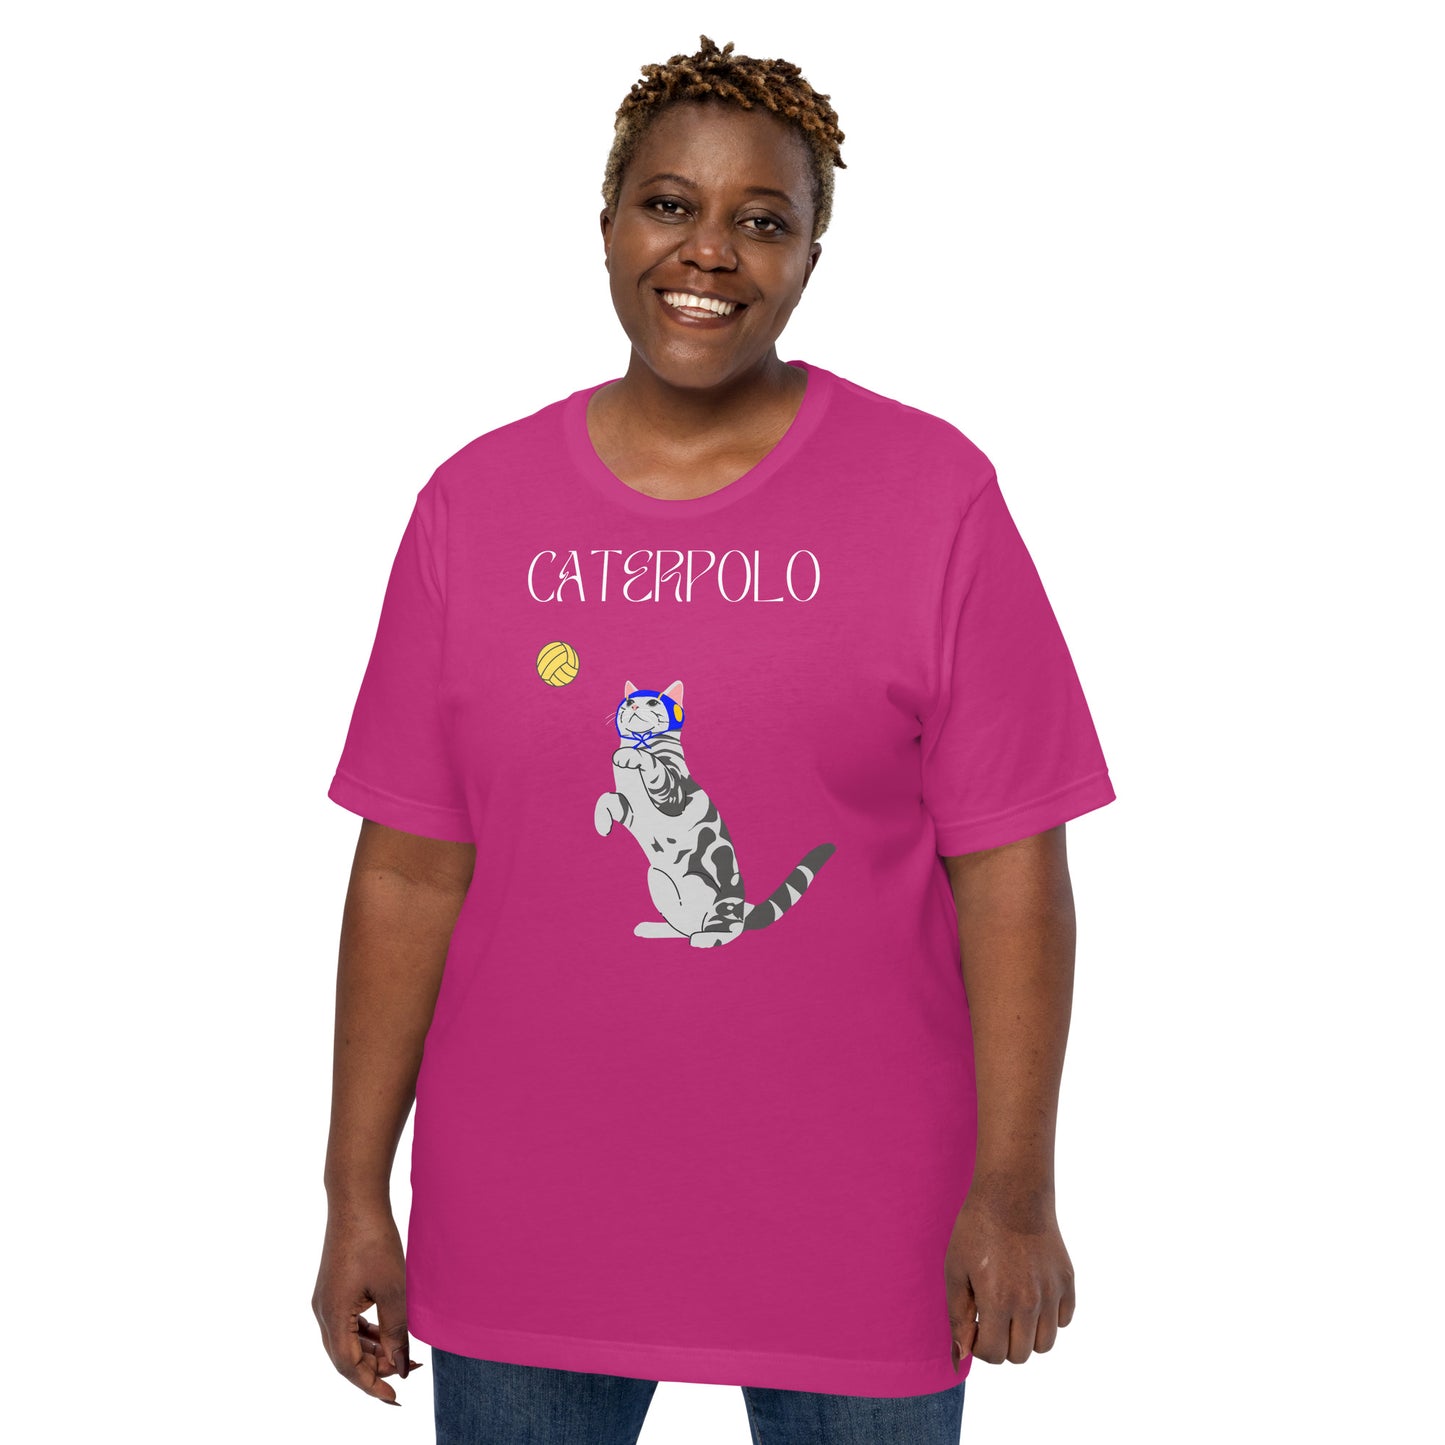 Caterpolo, if cats played waterpolo - Unisex Soft T-shirt - Bella Canvas 3001